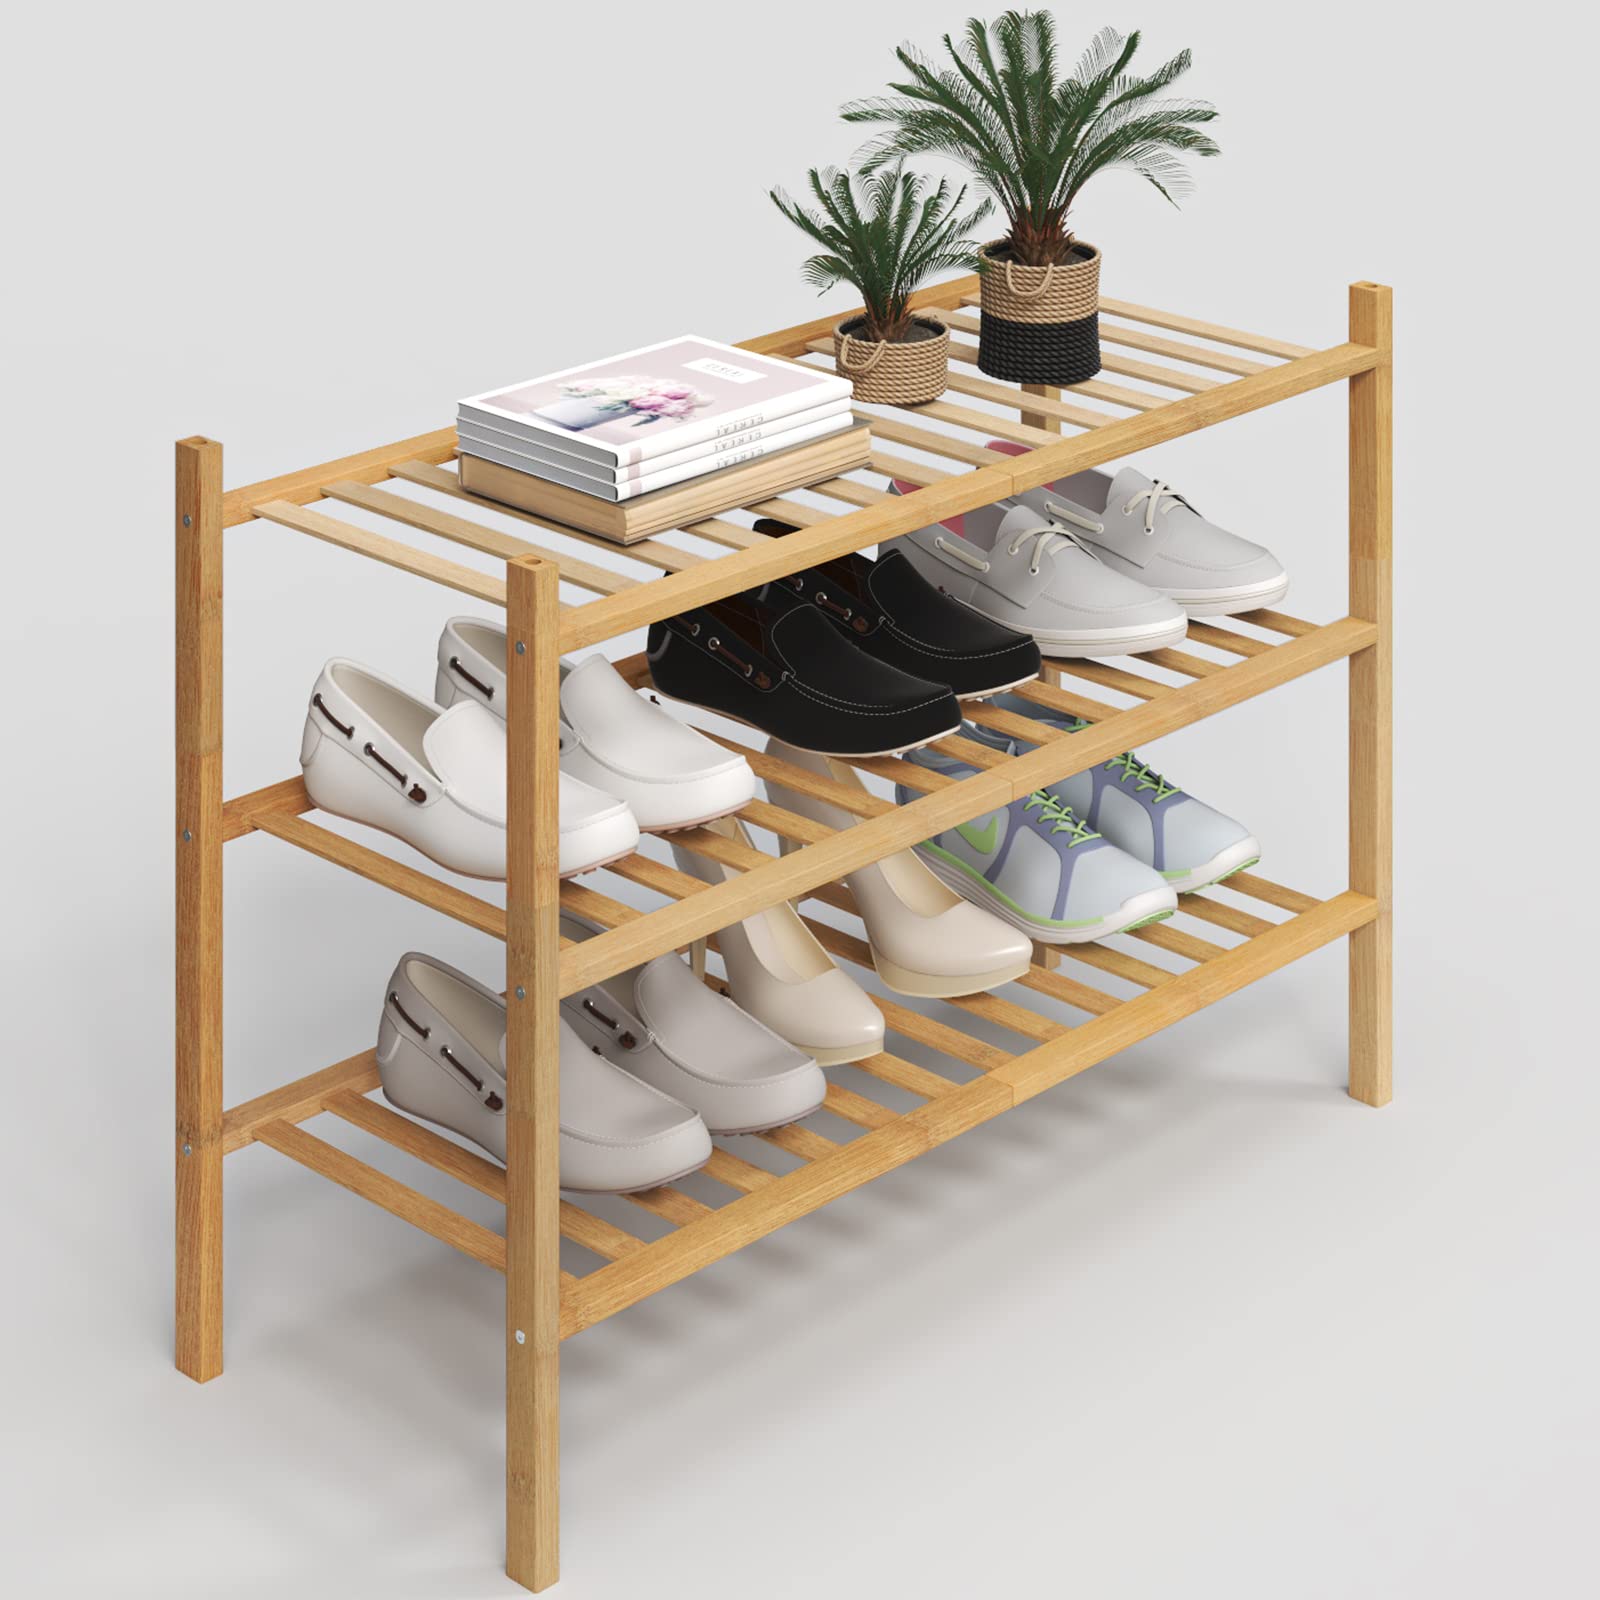 Bamboo Organizer Box: The Perfect Solution for Streamlined Storage